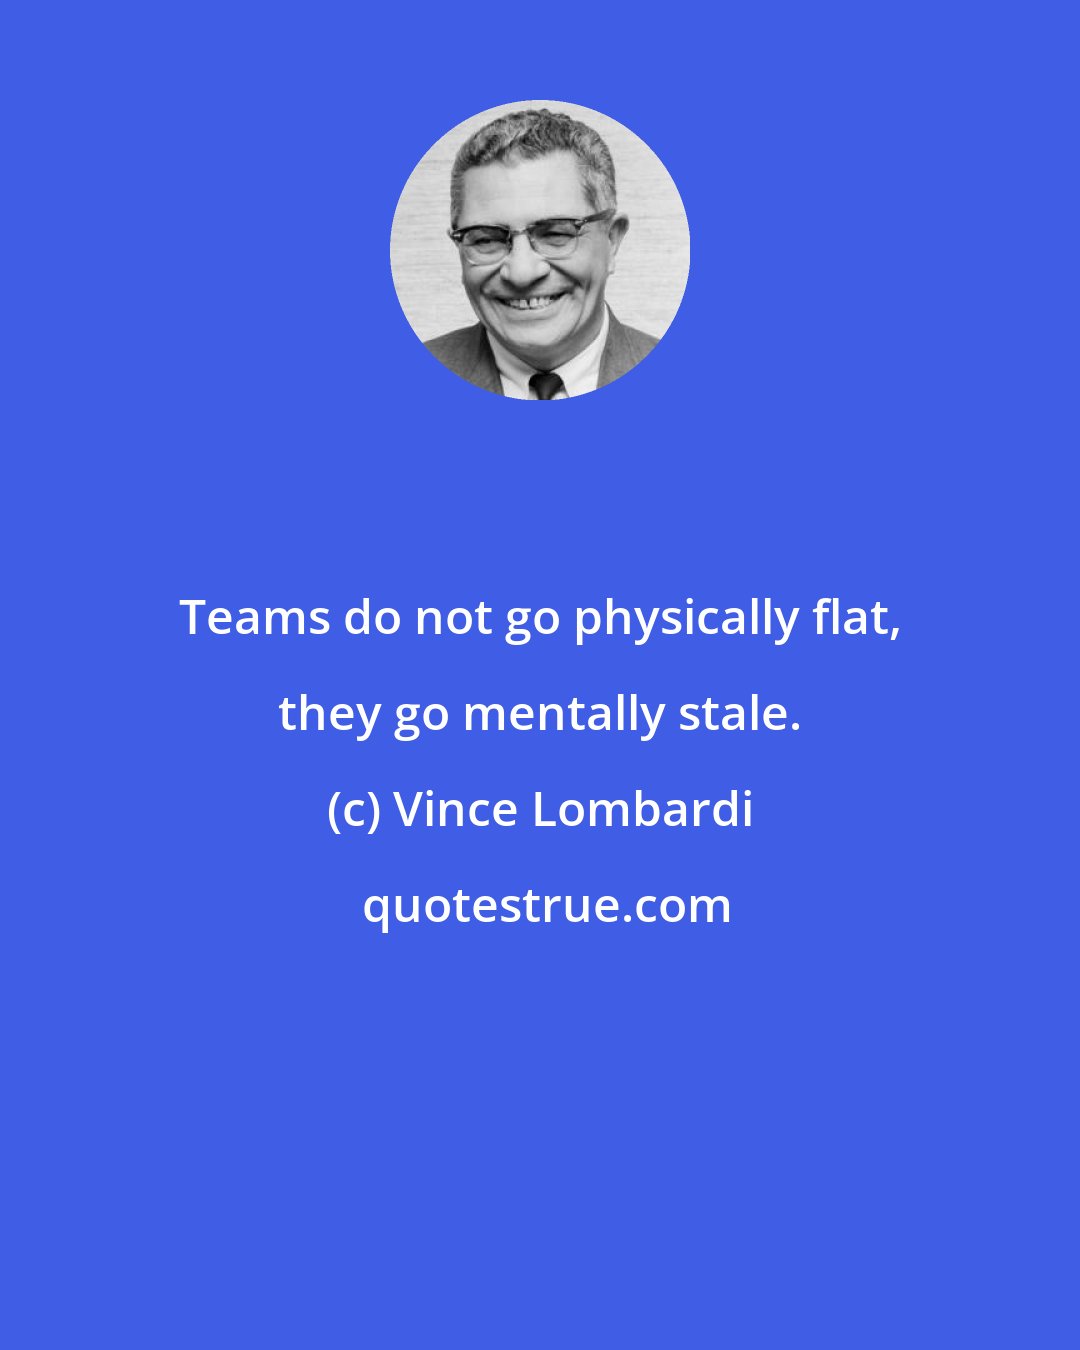 Vince Lombardi: Teams do not go physically flat, they go mentally stale.